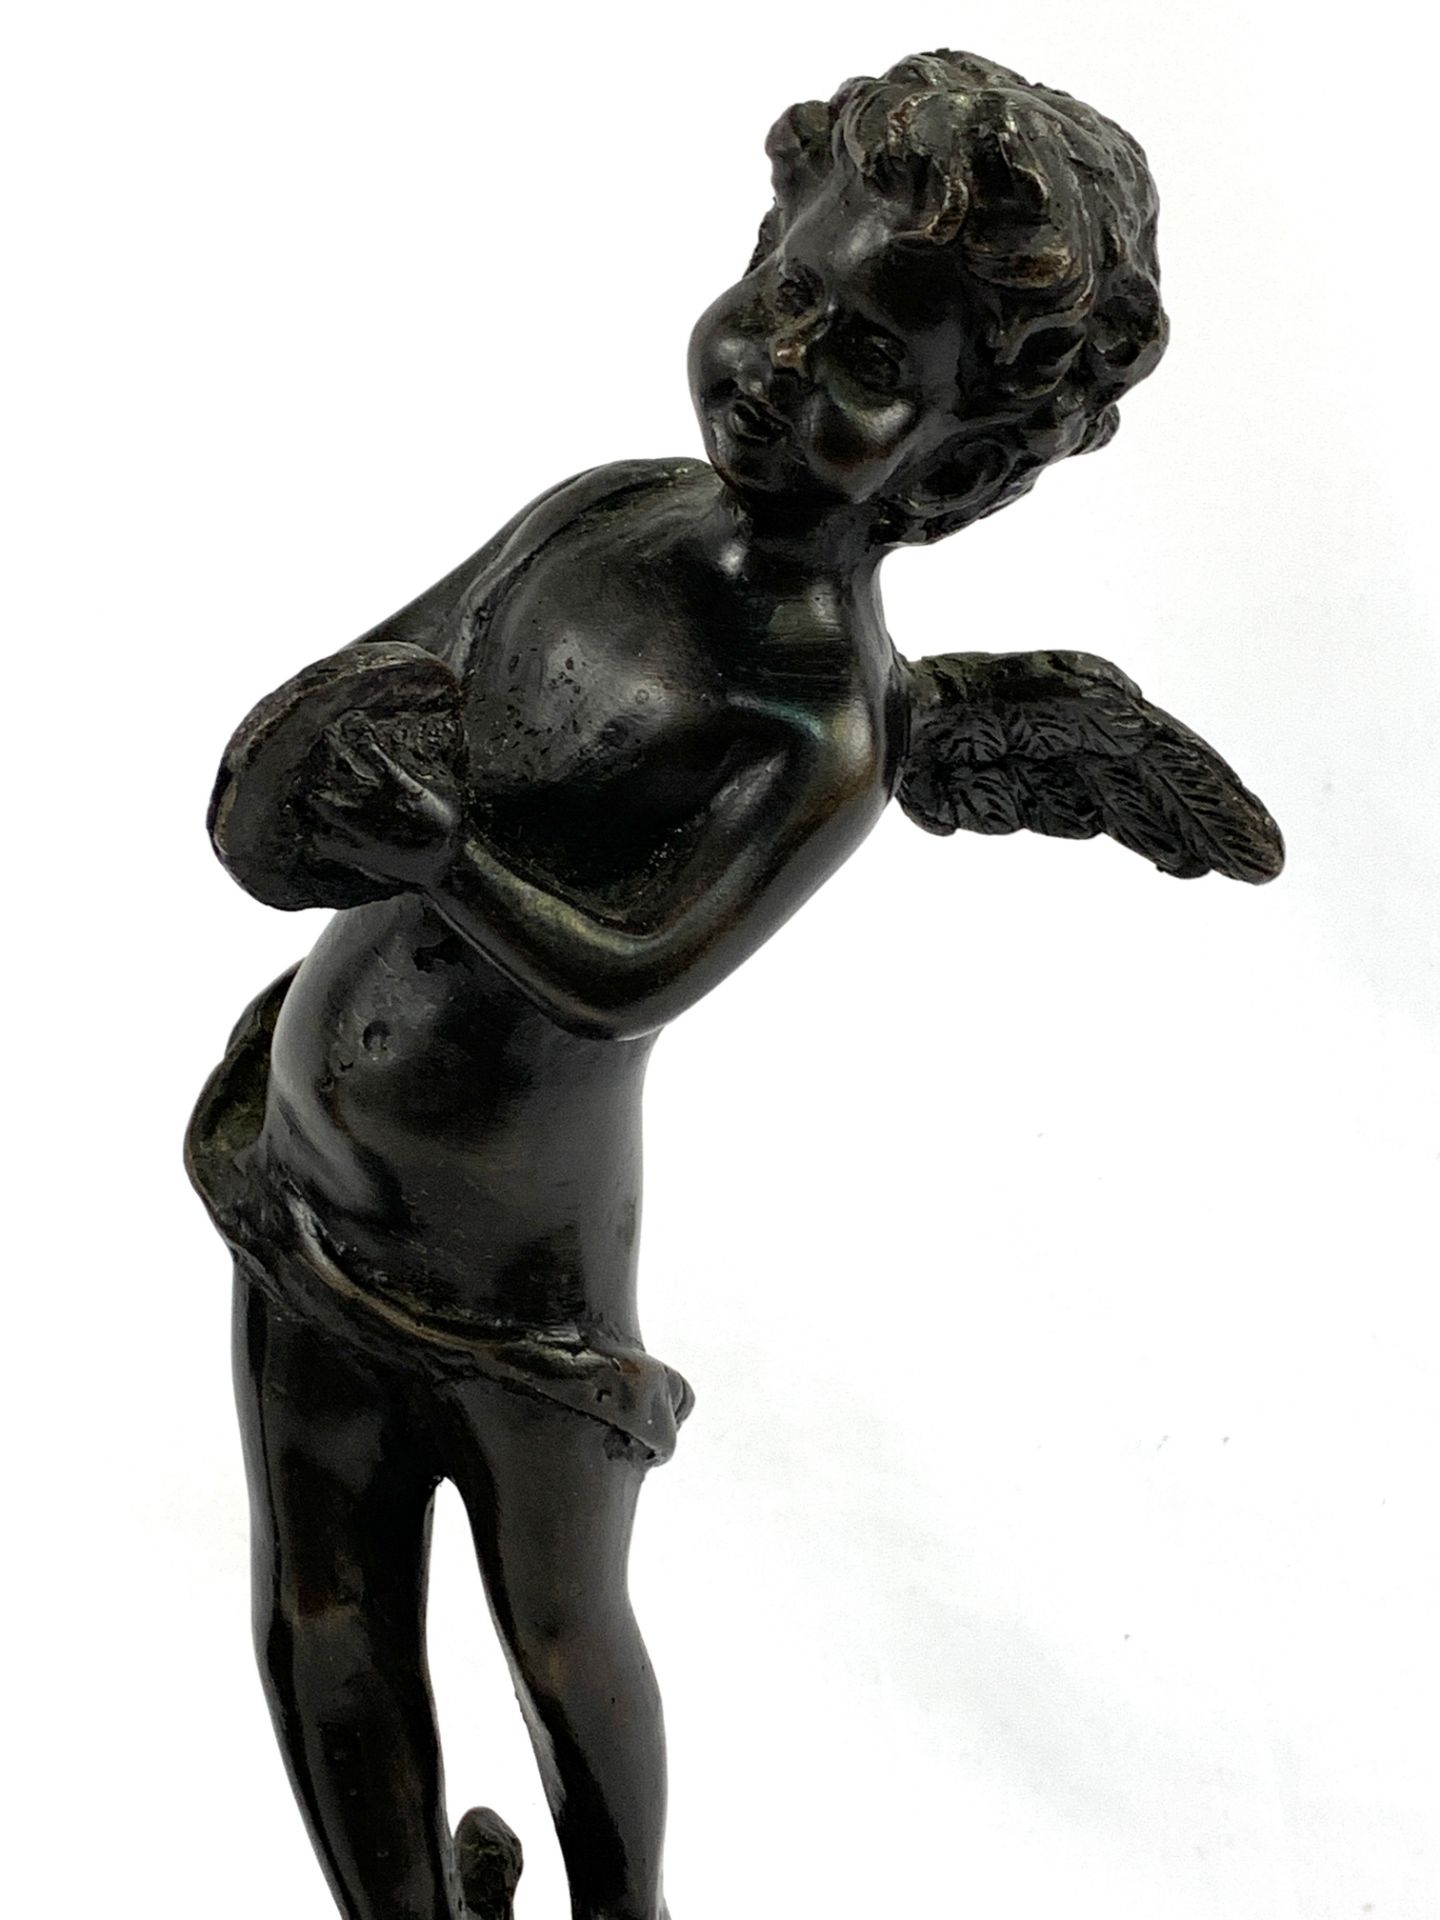 Pair of signed bronze figurines of putti on speckled marble bases, signed Auguste Moreau. - Image 2 of 5